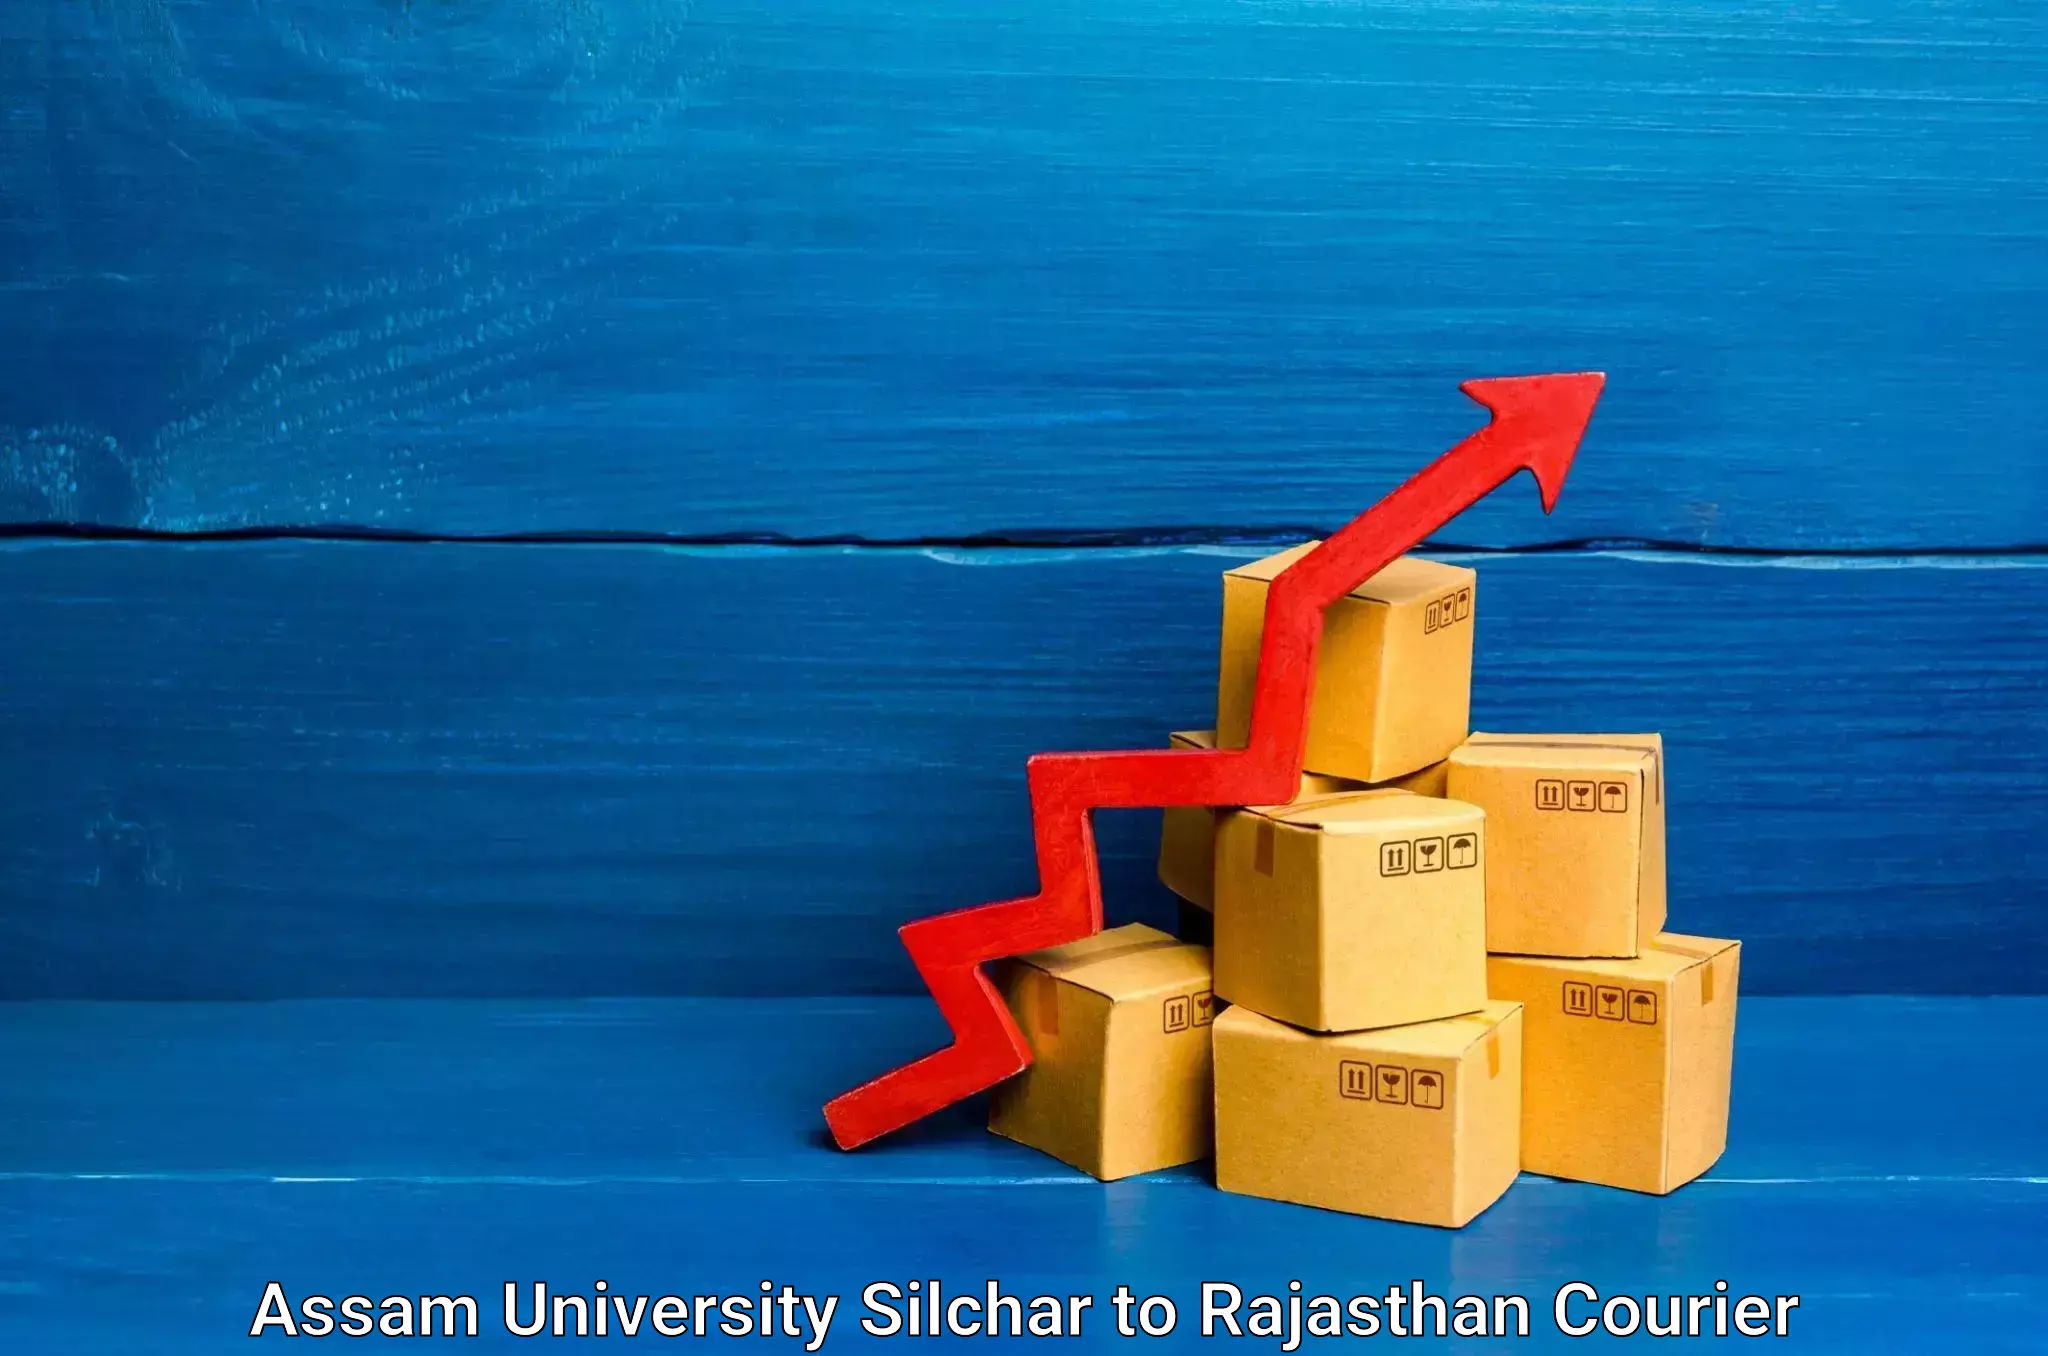 Efficient shipping operations in Assam University Silchar to Lohawat